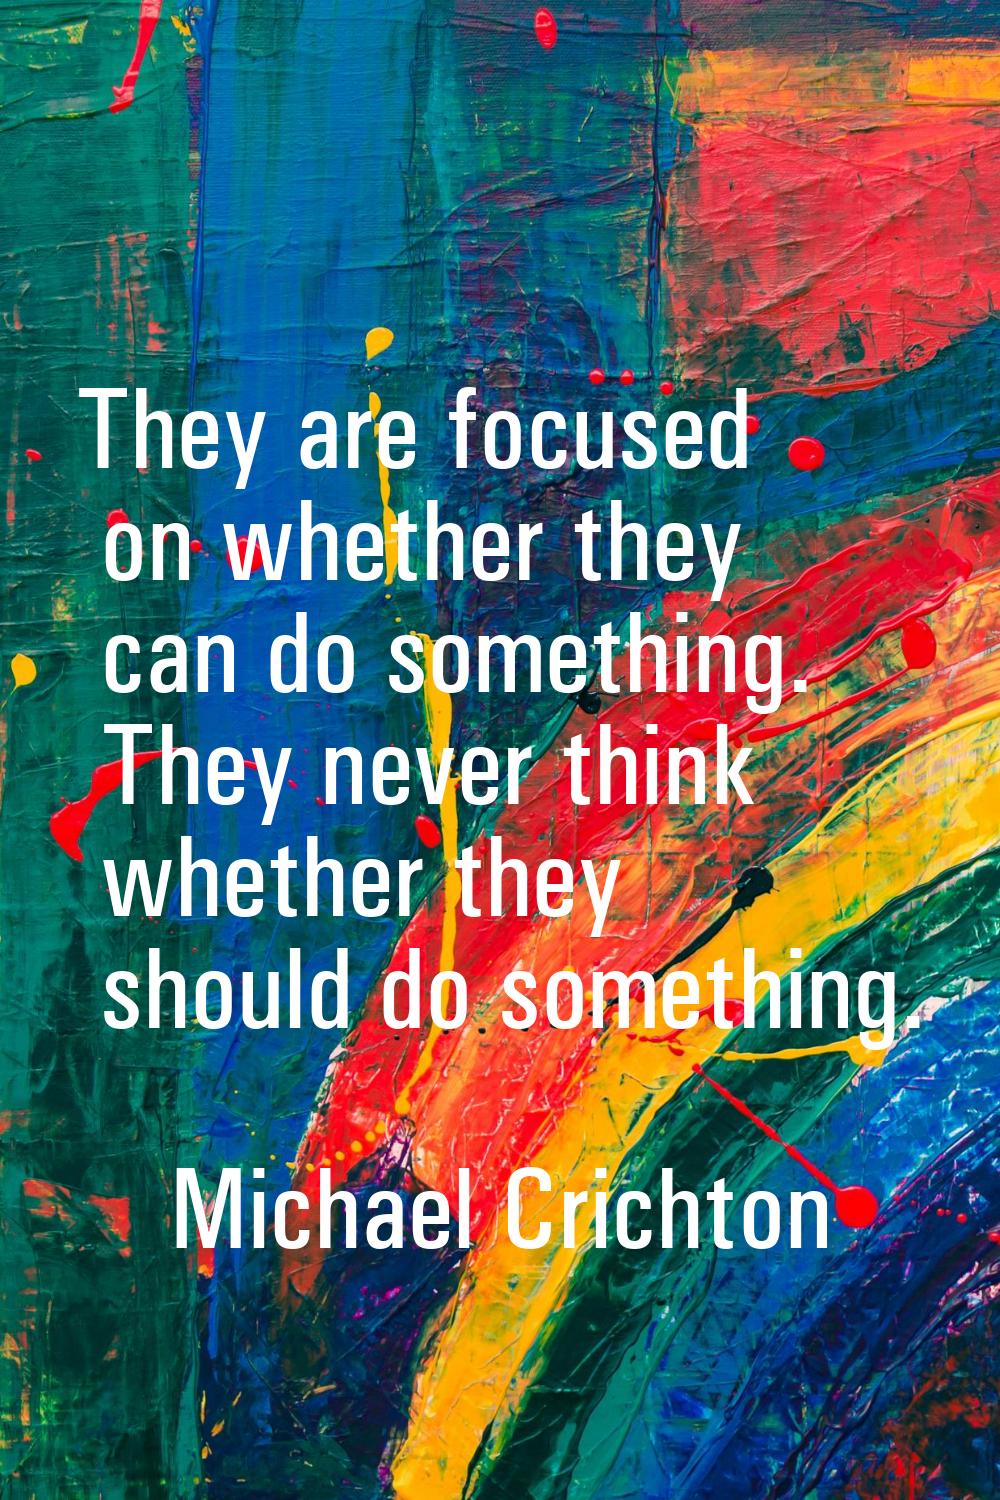 They are focused on whether they can do something. They never think whether they should do somethin